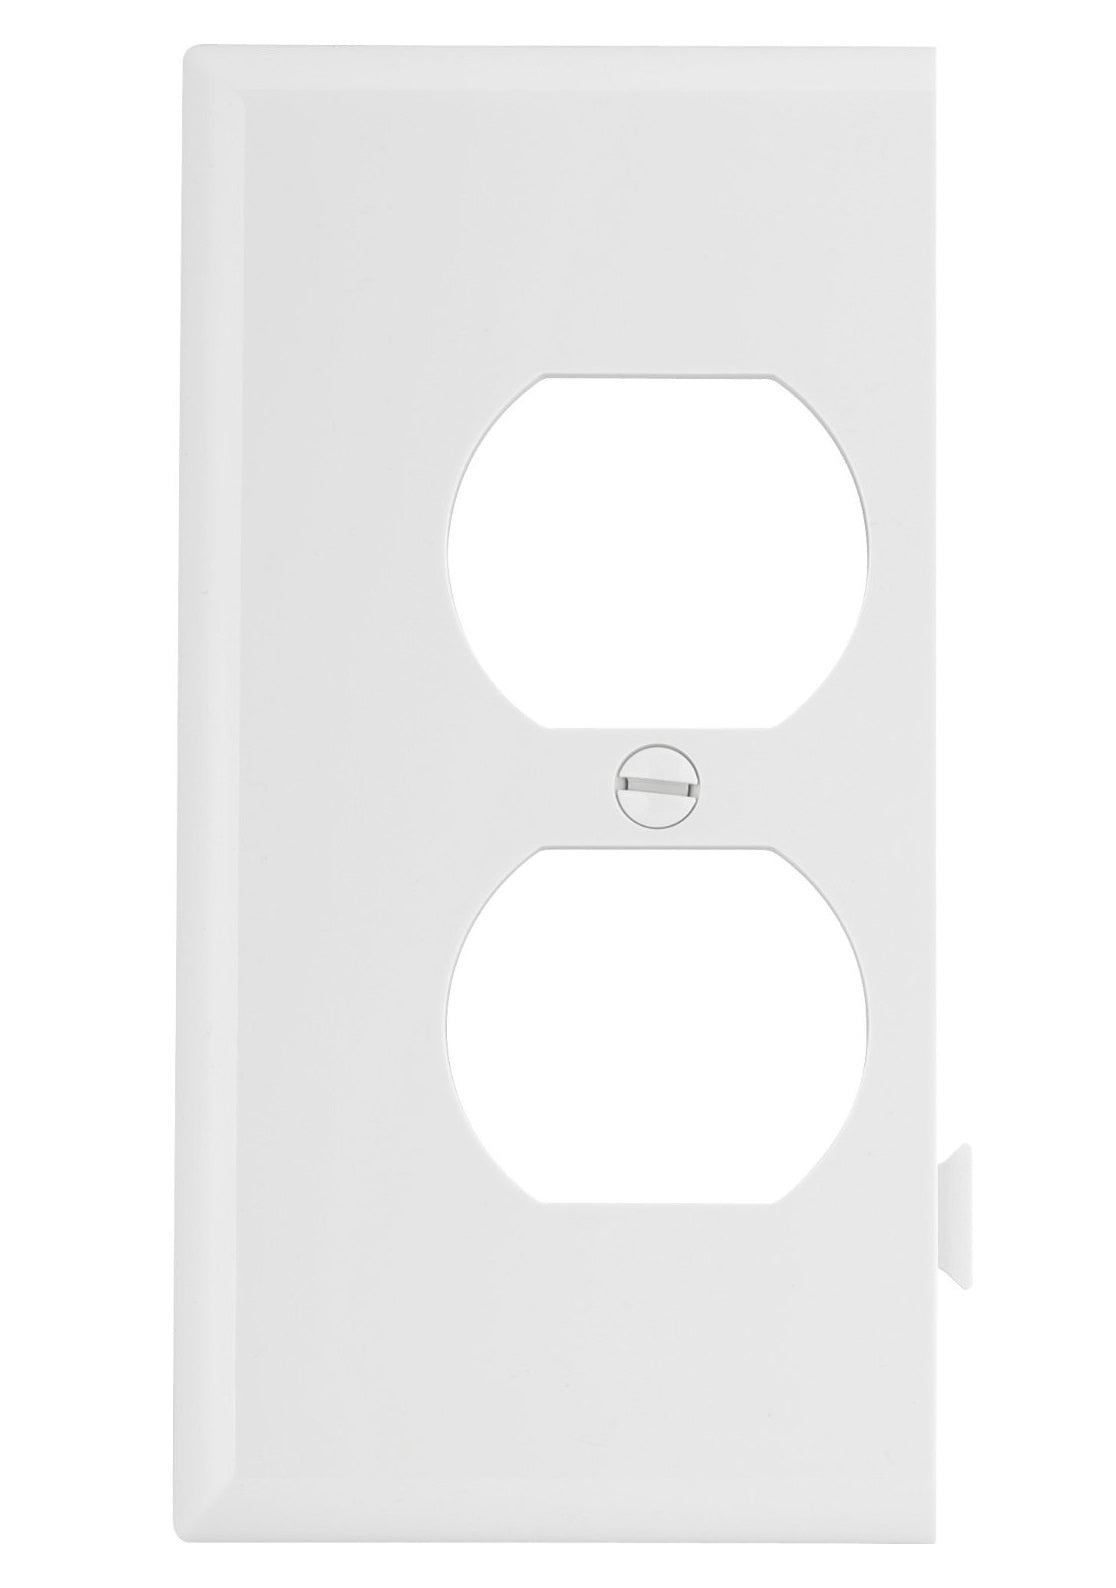 buy electrical switches & receptacles at cheap rate in bulk. wholesale & retail industrial electrical supplies store. home décor ideas, maintenance, repair replacement parts